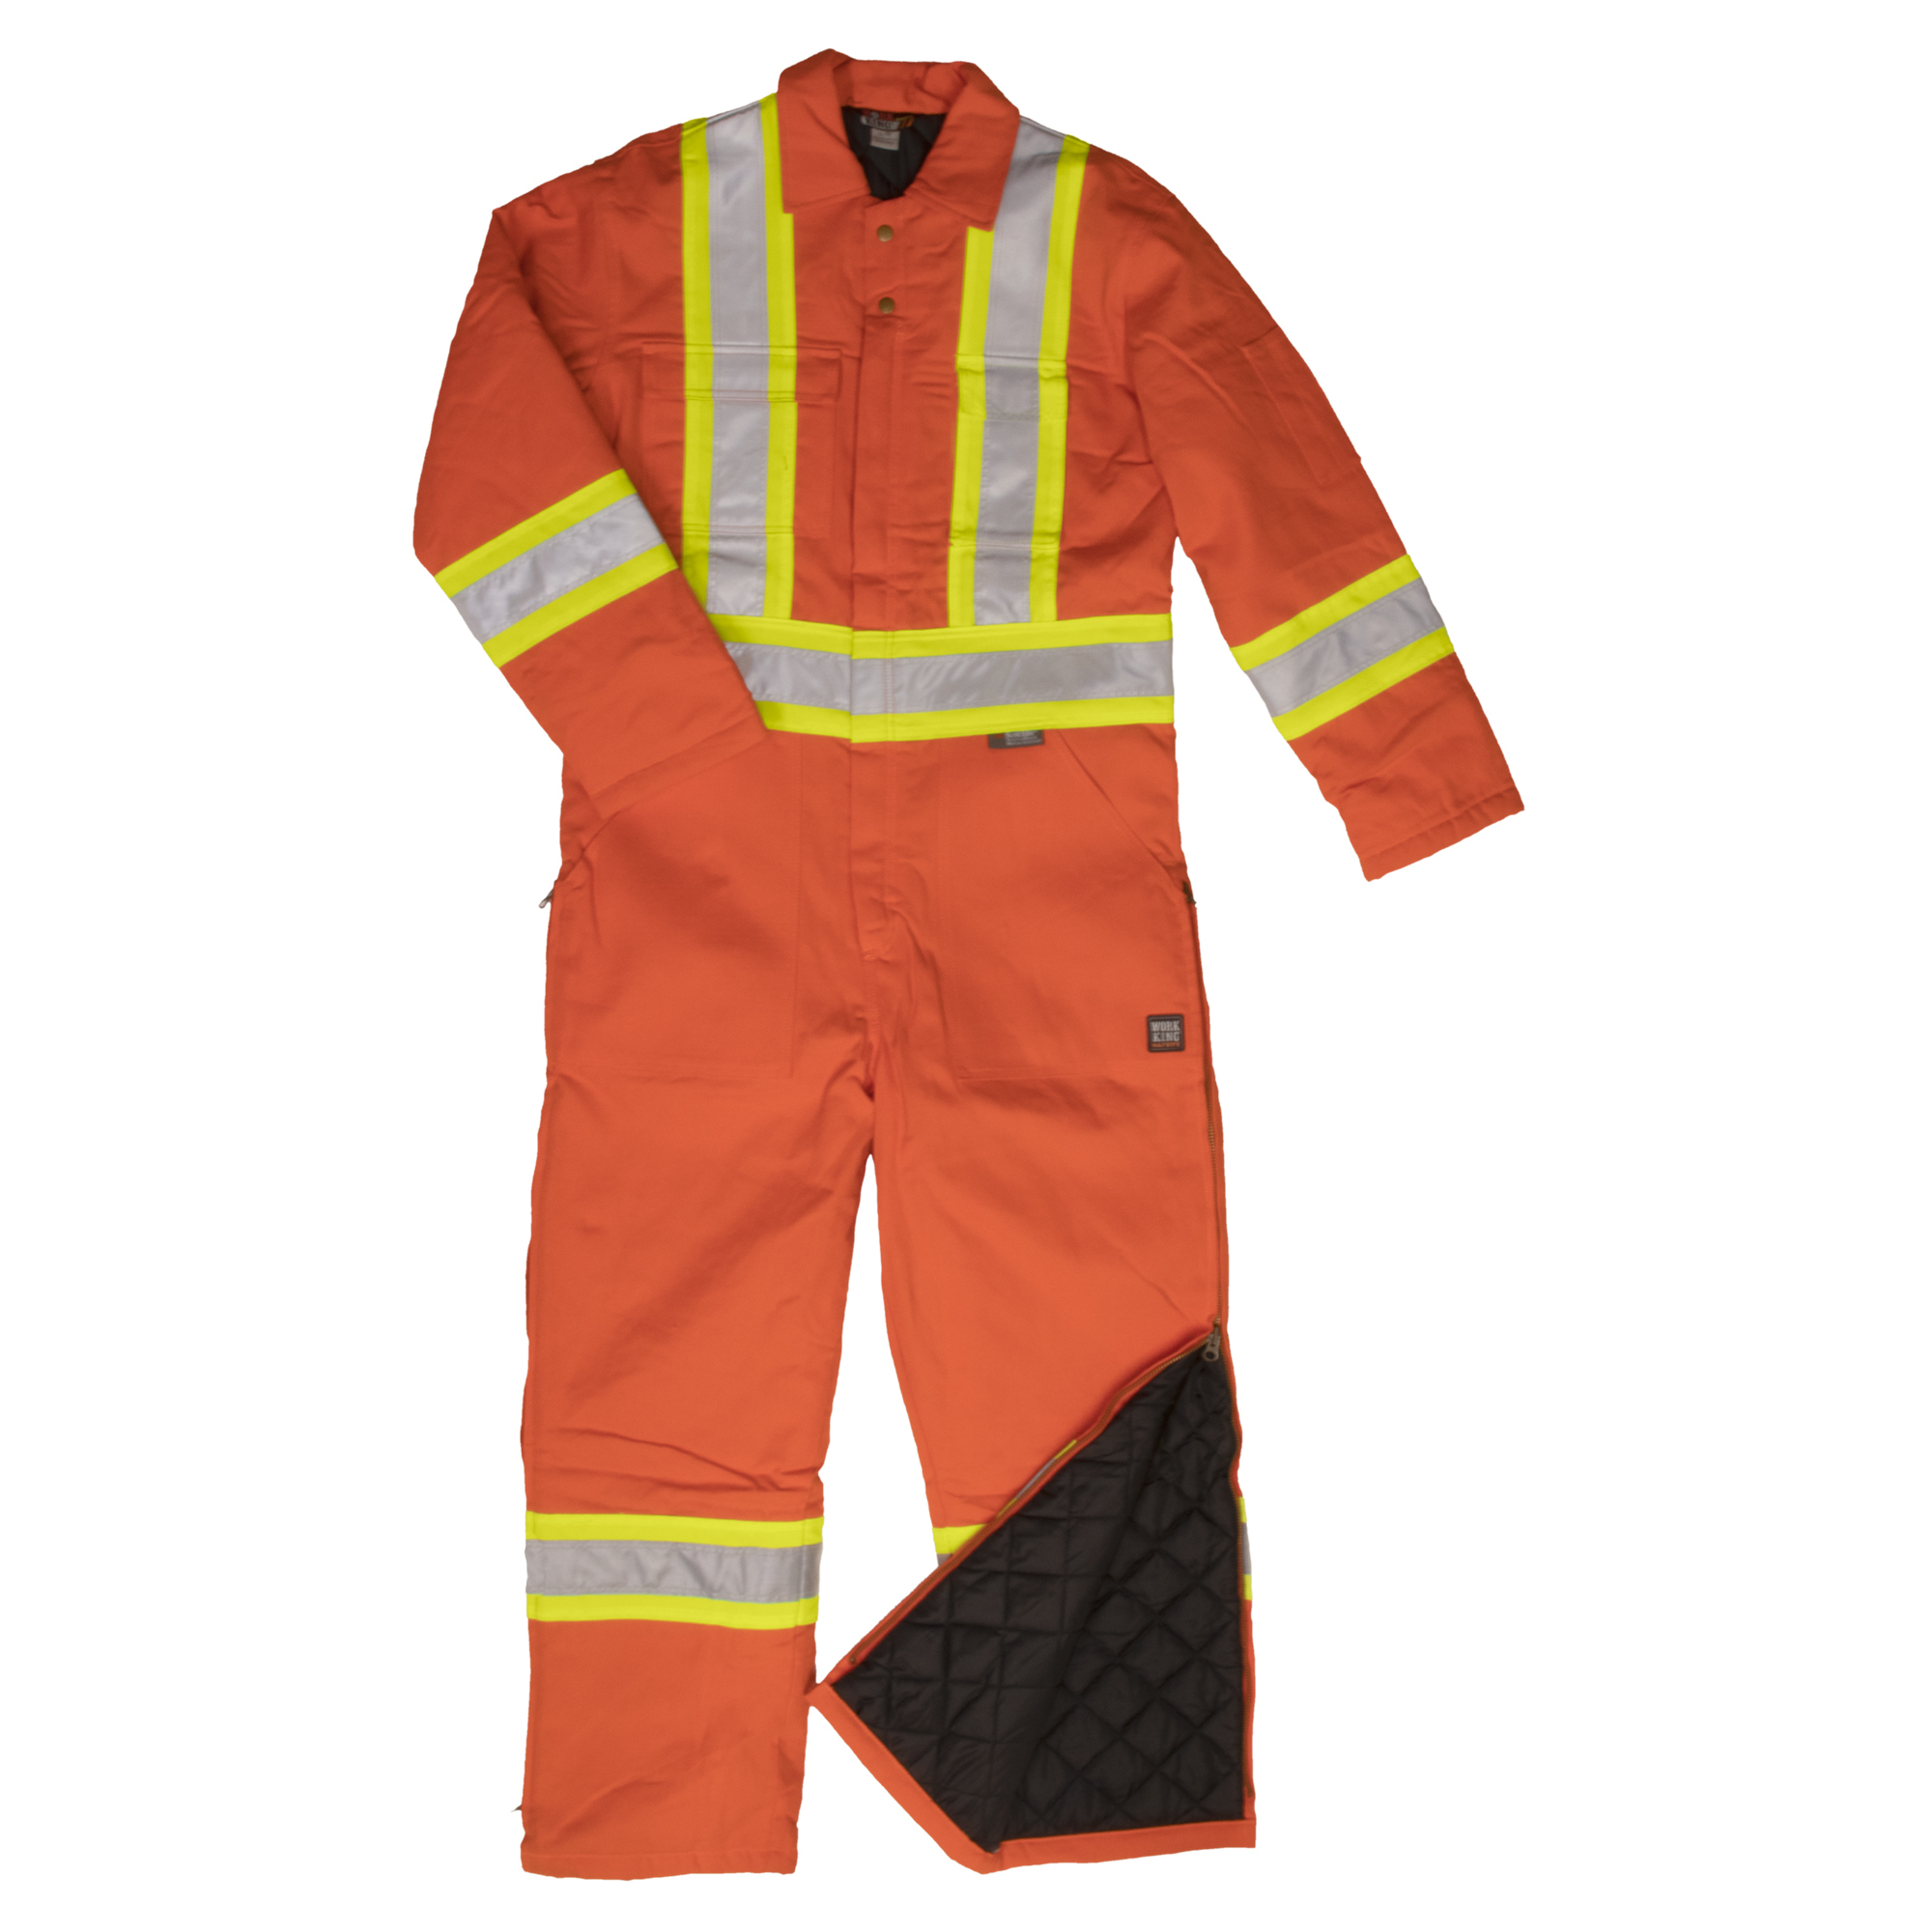 Tough Duck, Insulated Safety Coverall, Size 5XL, Color Orange, Model S78731